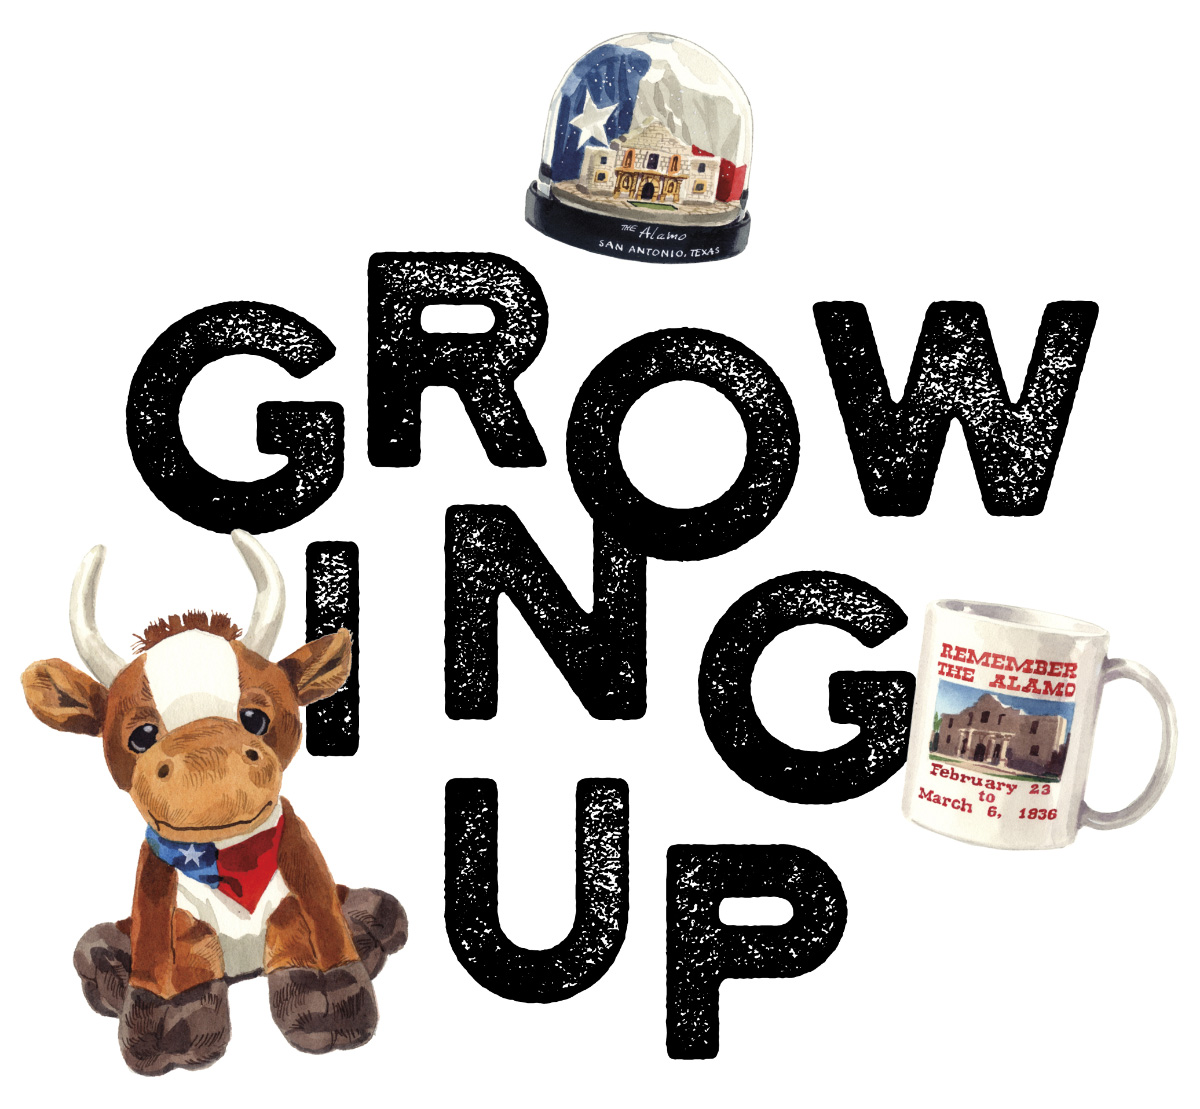 Text: Growing Up with illustrations of a snow globe, stuffed longhorn and Alamo coffee cup